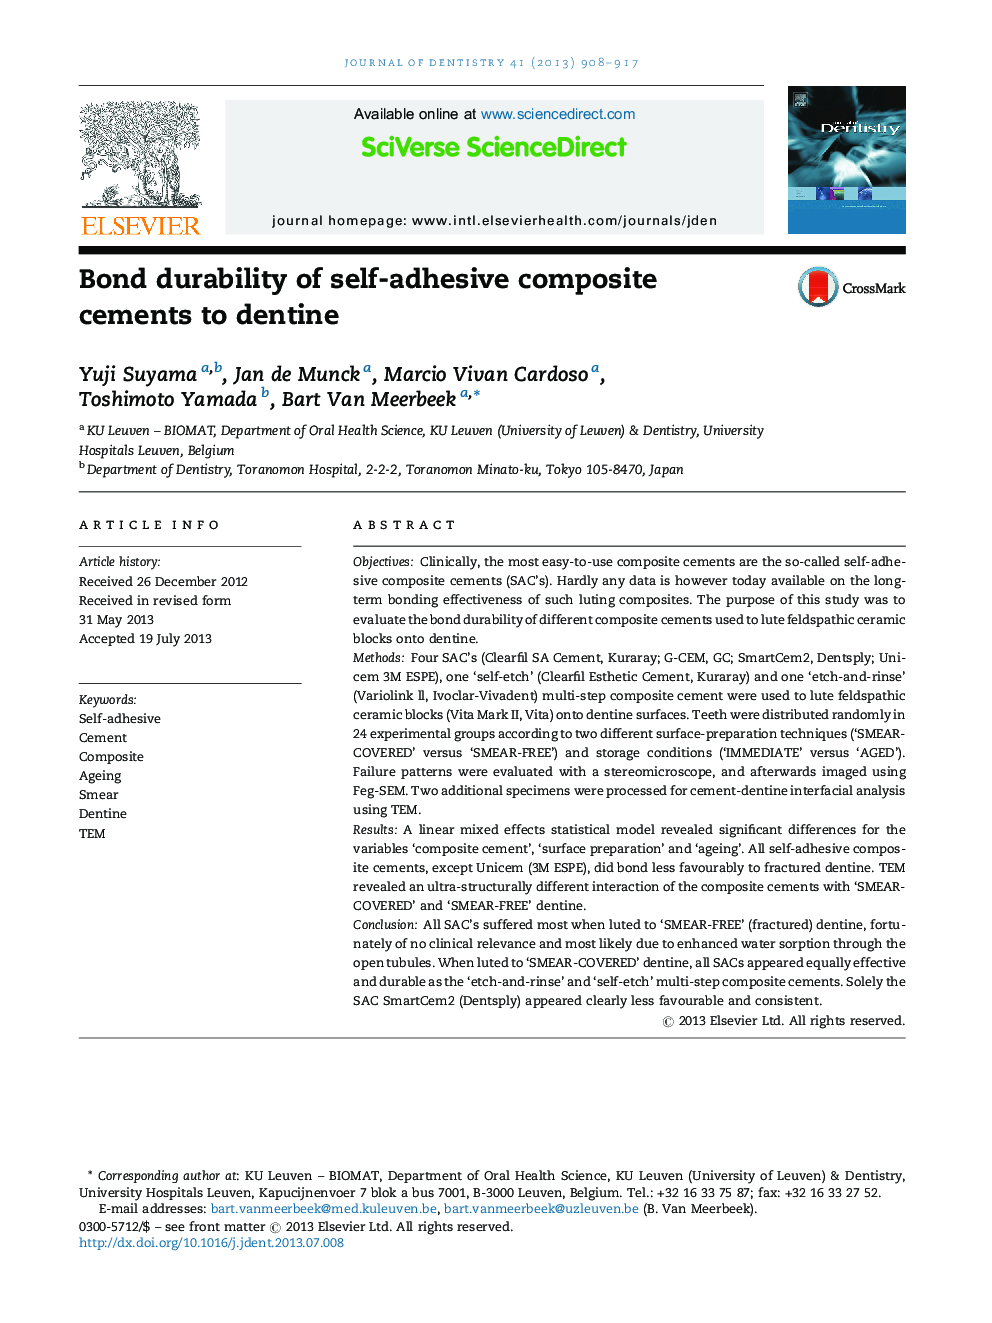 Bond durability of self-adhesive composite cements to dentine